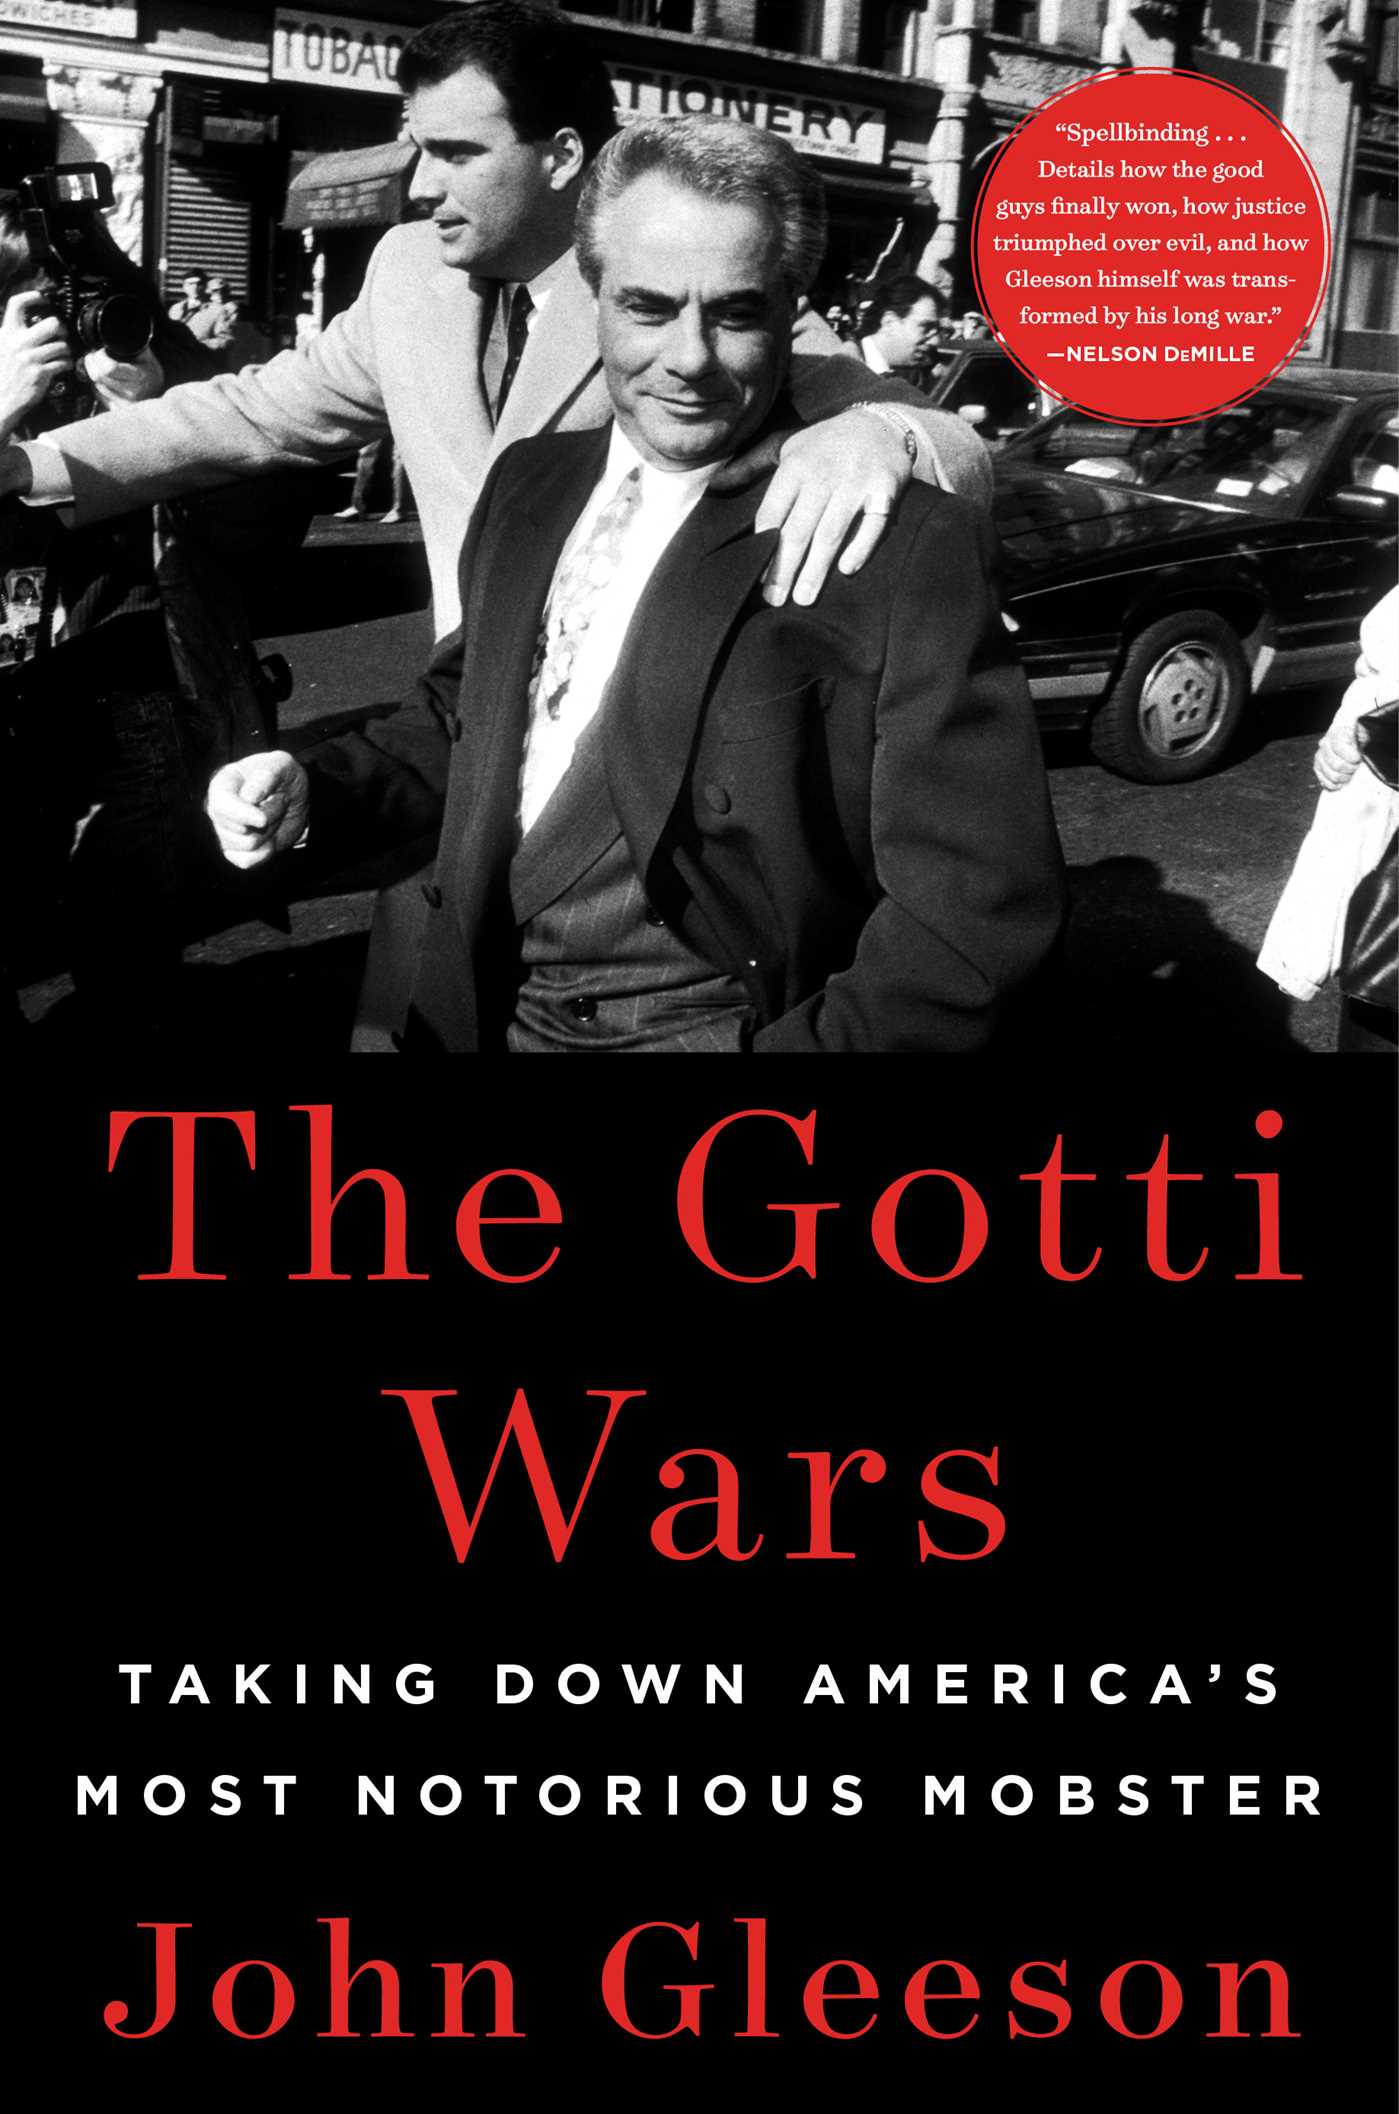 Book cover with black and white photo of John Gotti